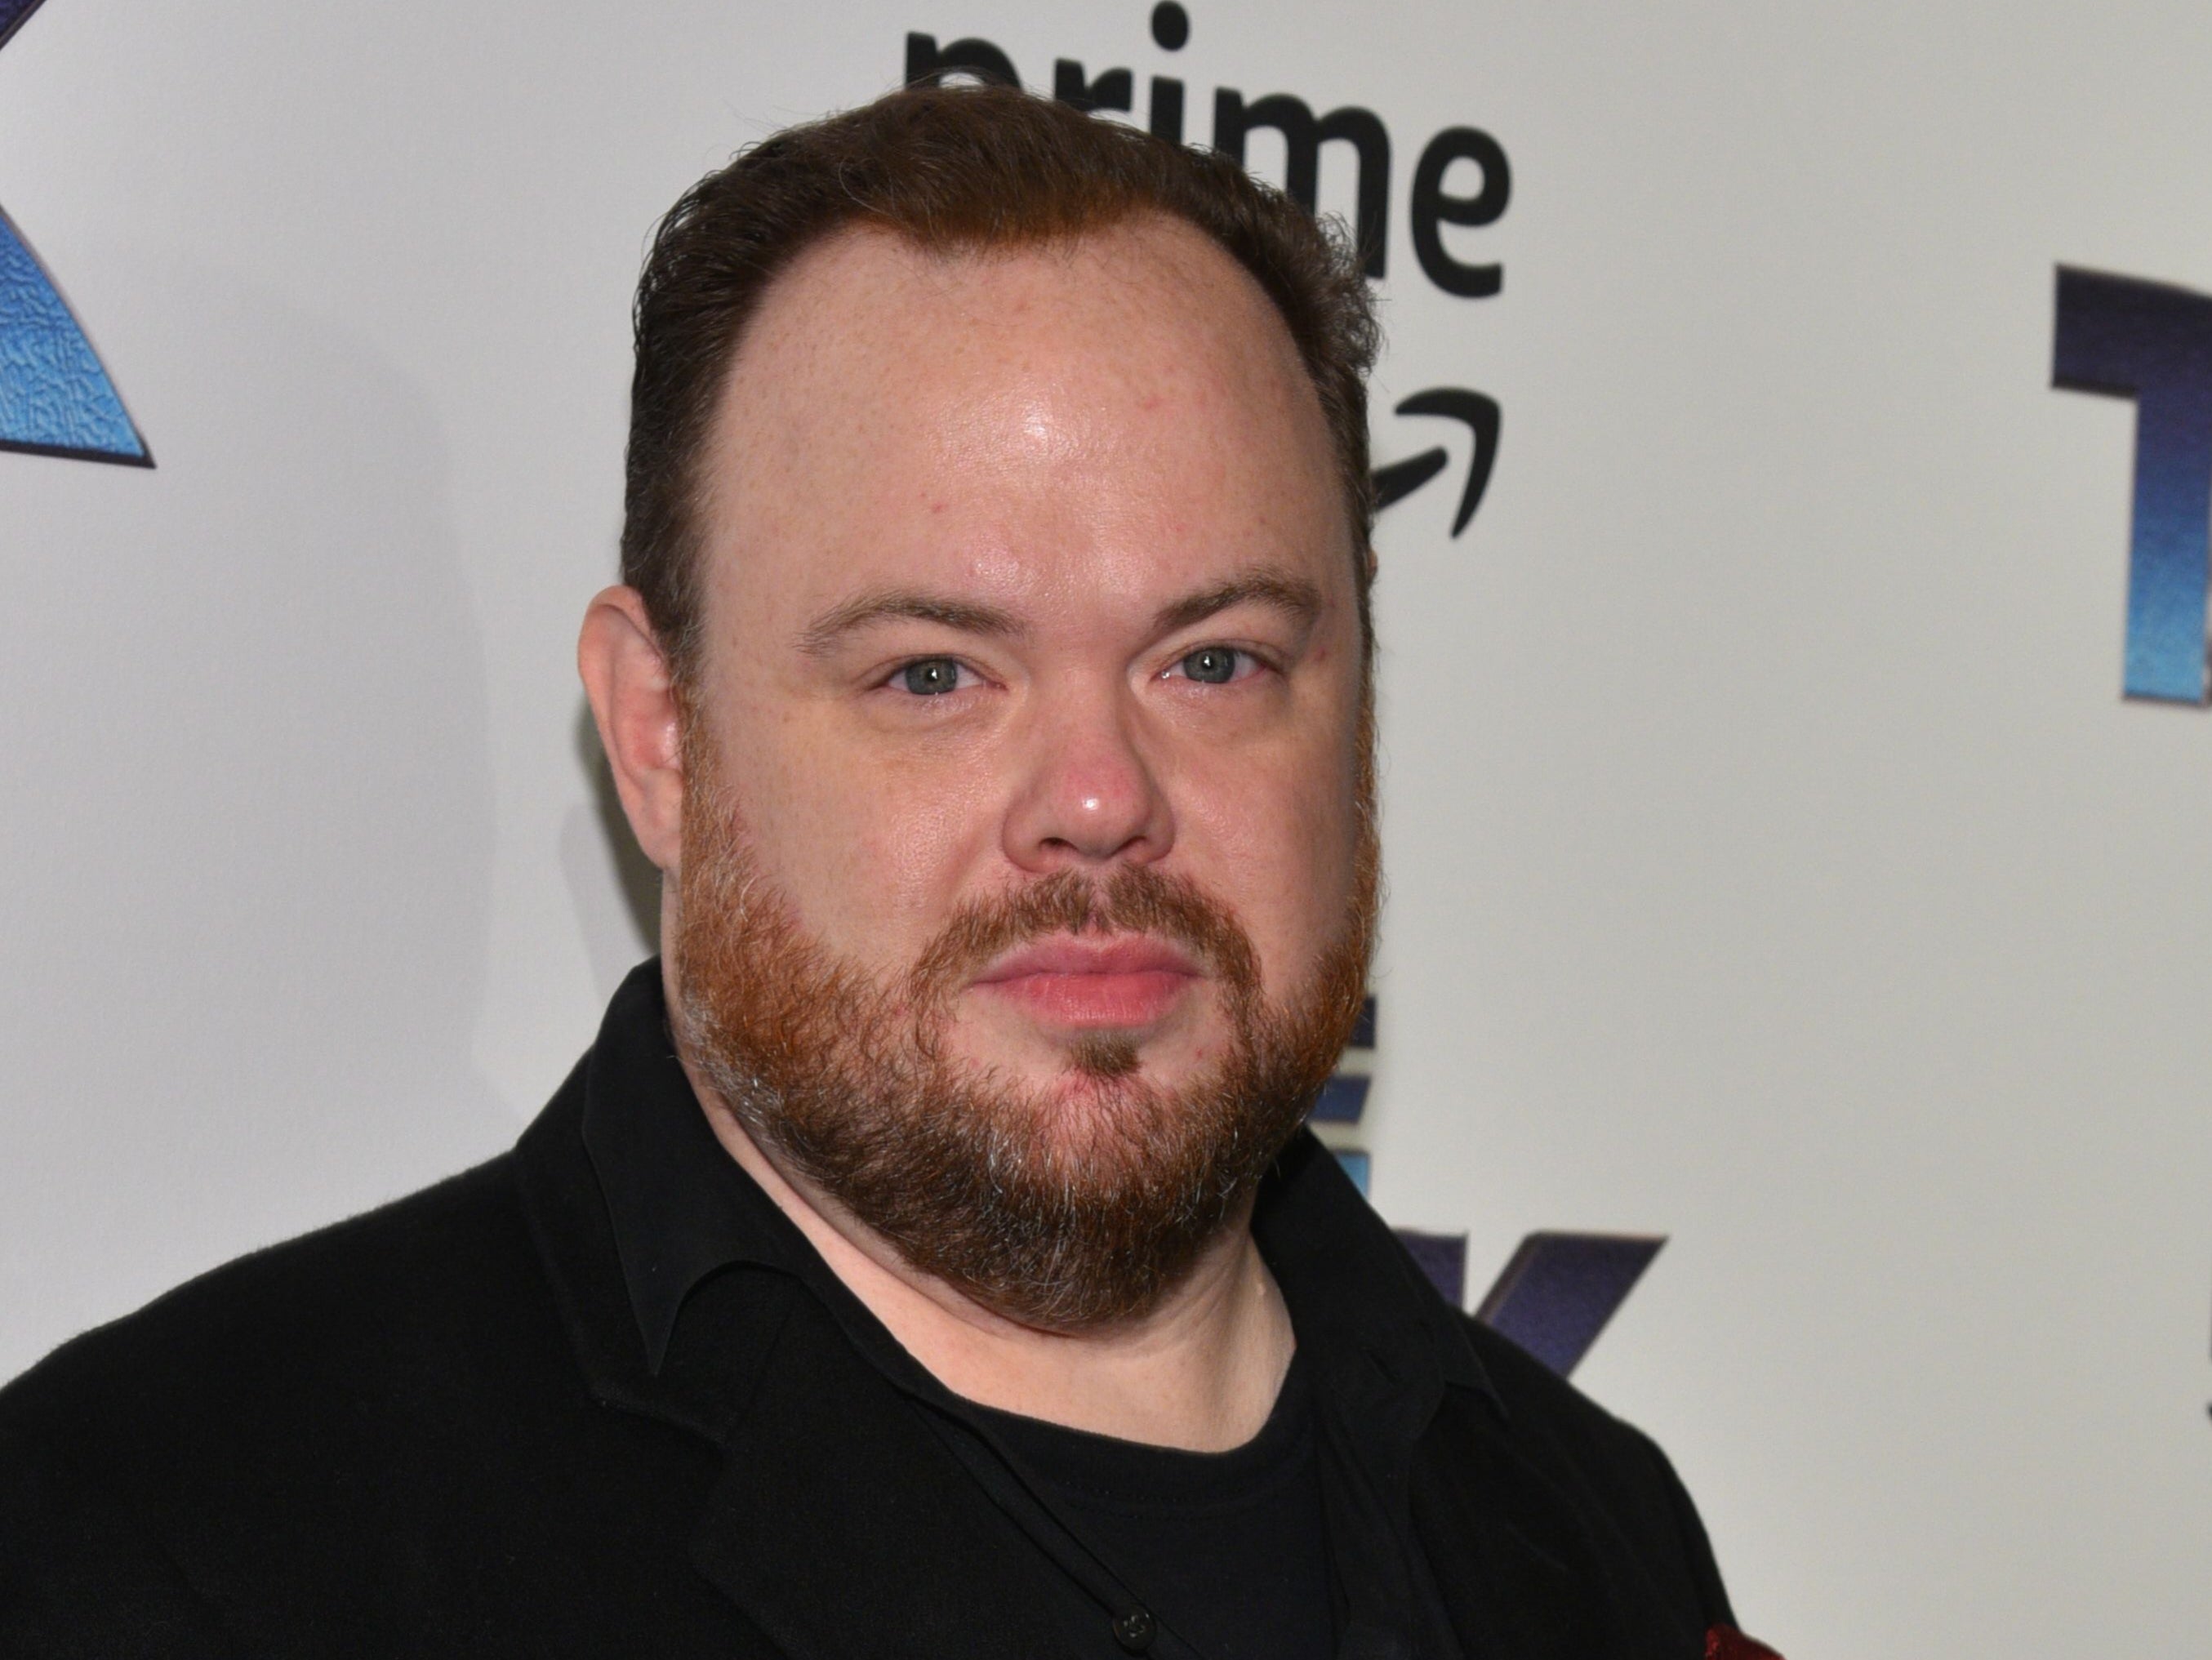 Home Alone actor Devin Ratray arrested for allegedly assaulting girlfriend after fan convention The Independent